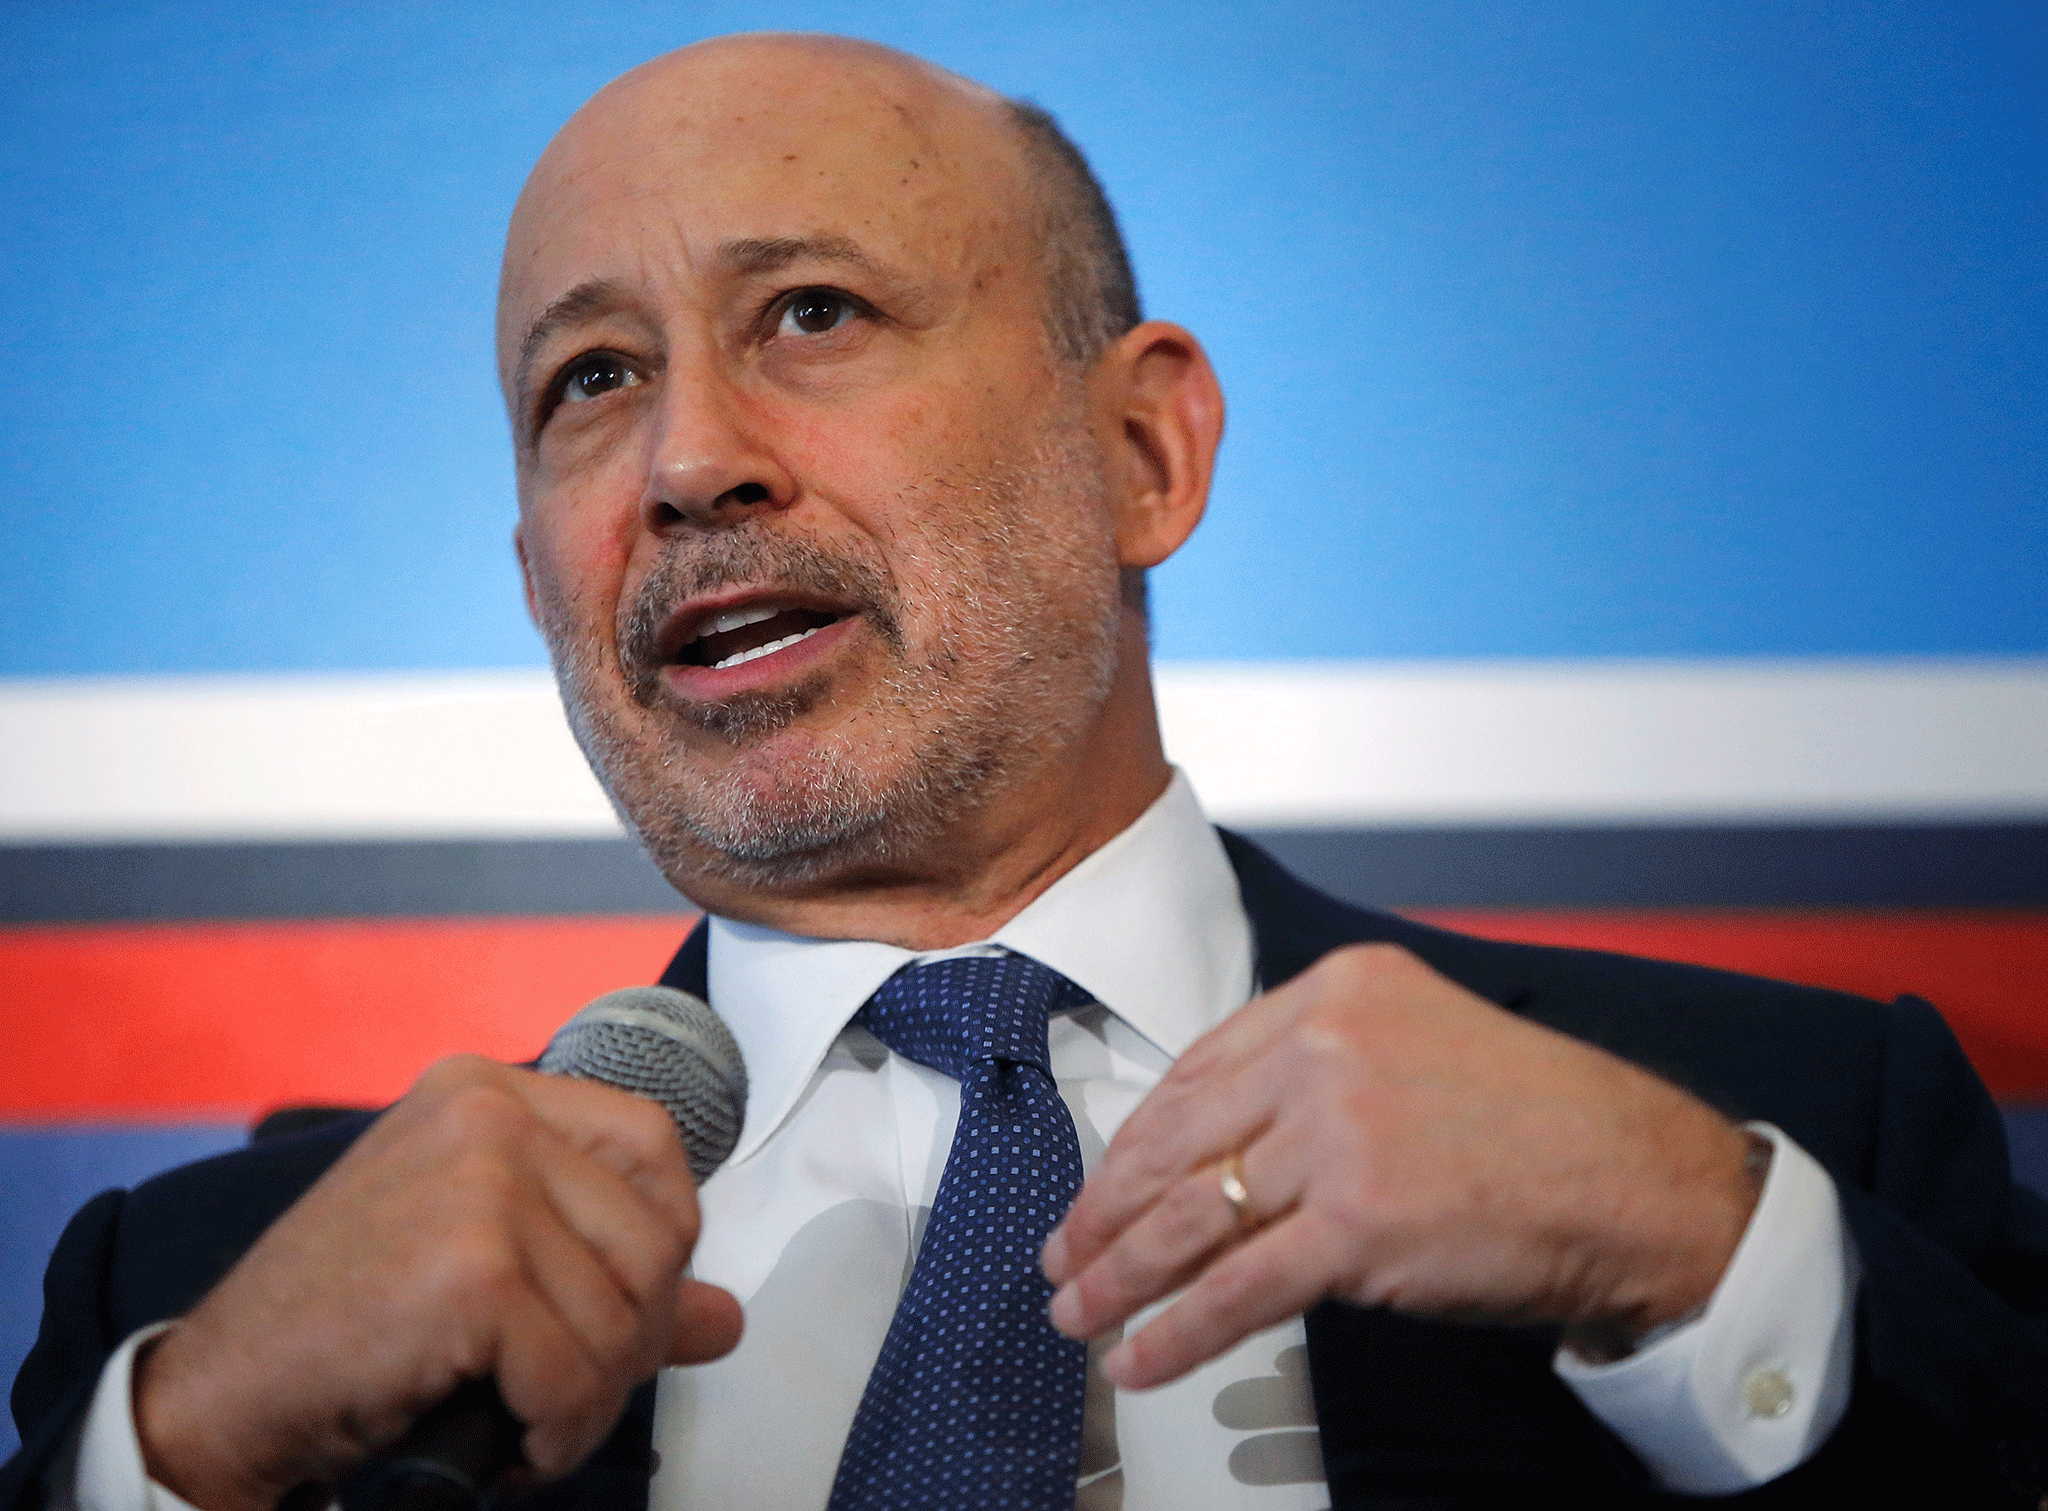 Lloyd Blankfein has previously said Brexit vote was primarily an anti-immigration vote